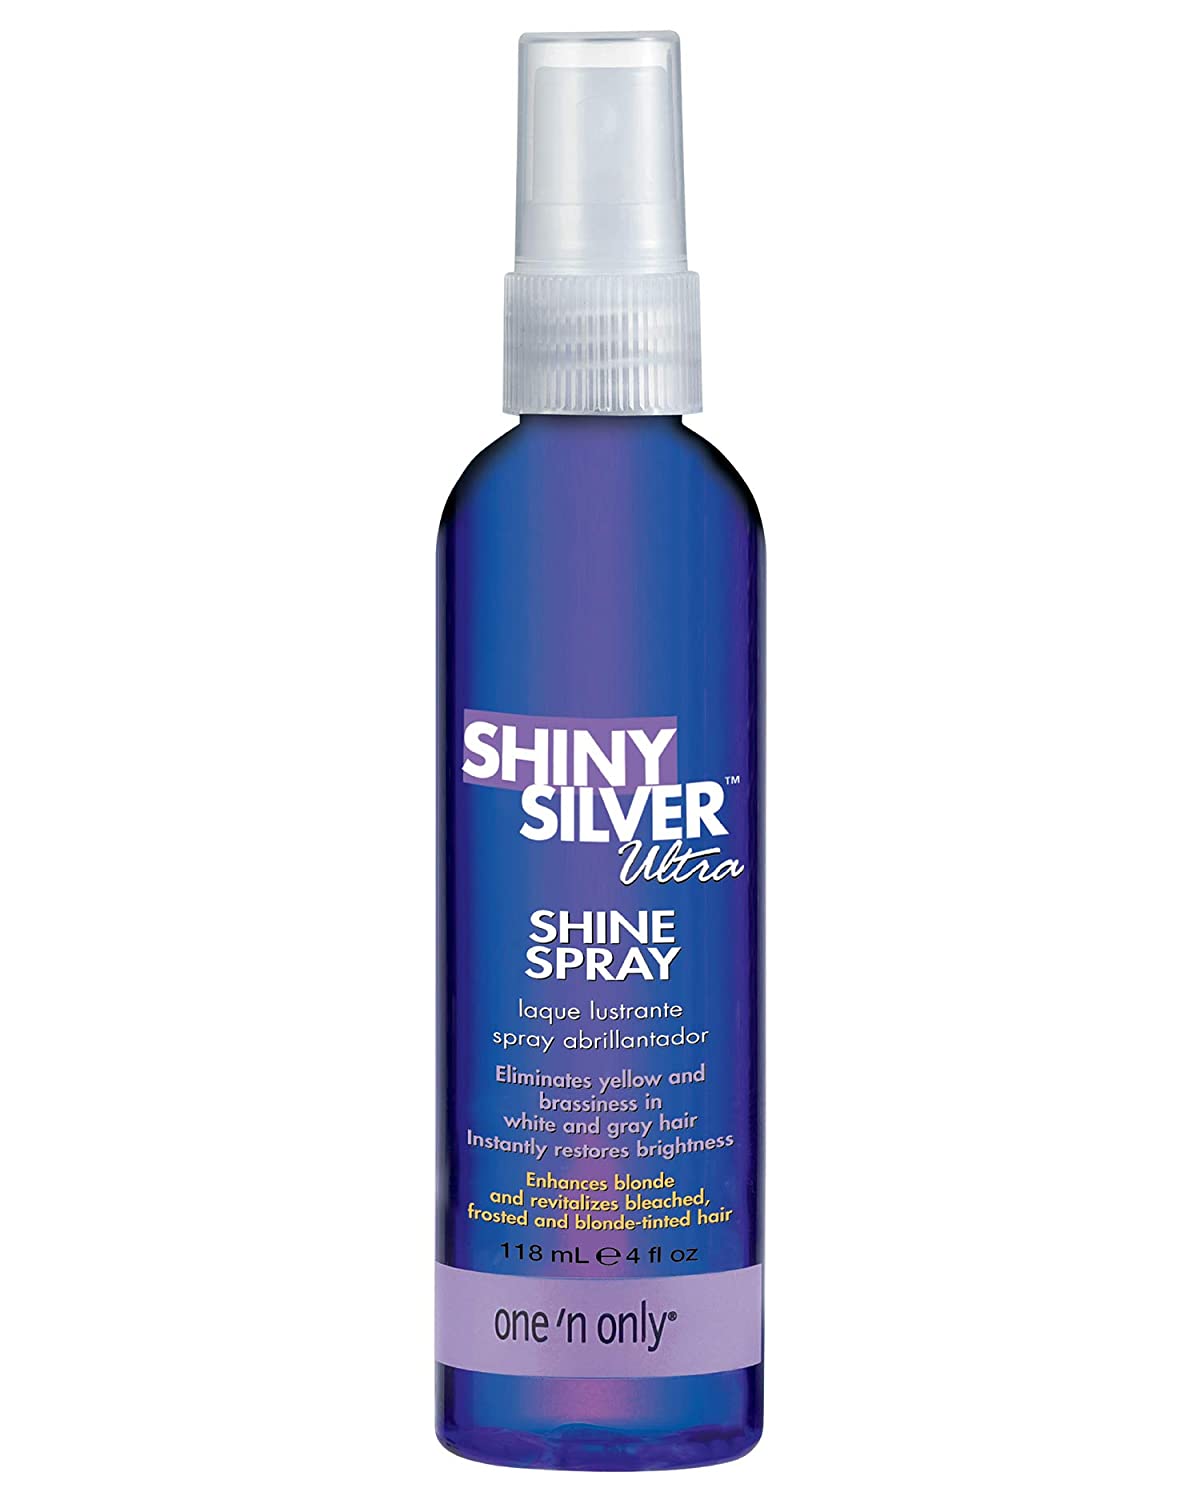 One 'n Only Shiny Silver Ultra Shine Spray, Restores Shiny Brightness to White, Grey, Bleached, Frosted, or Blonde-Tinted Hair, Instantly Revitalizes Dry Hair, Prevents Color Fading